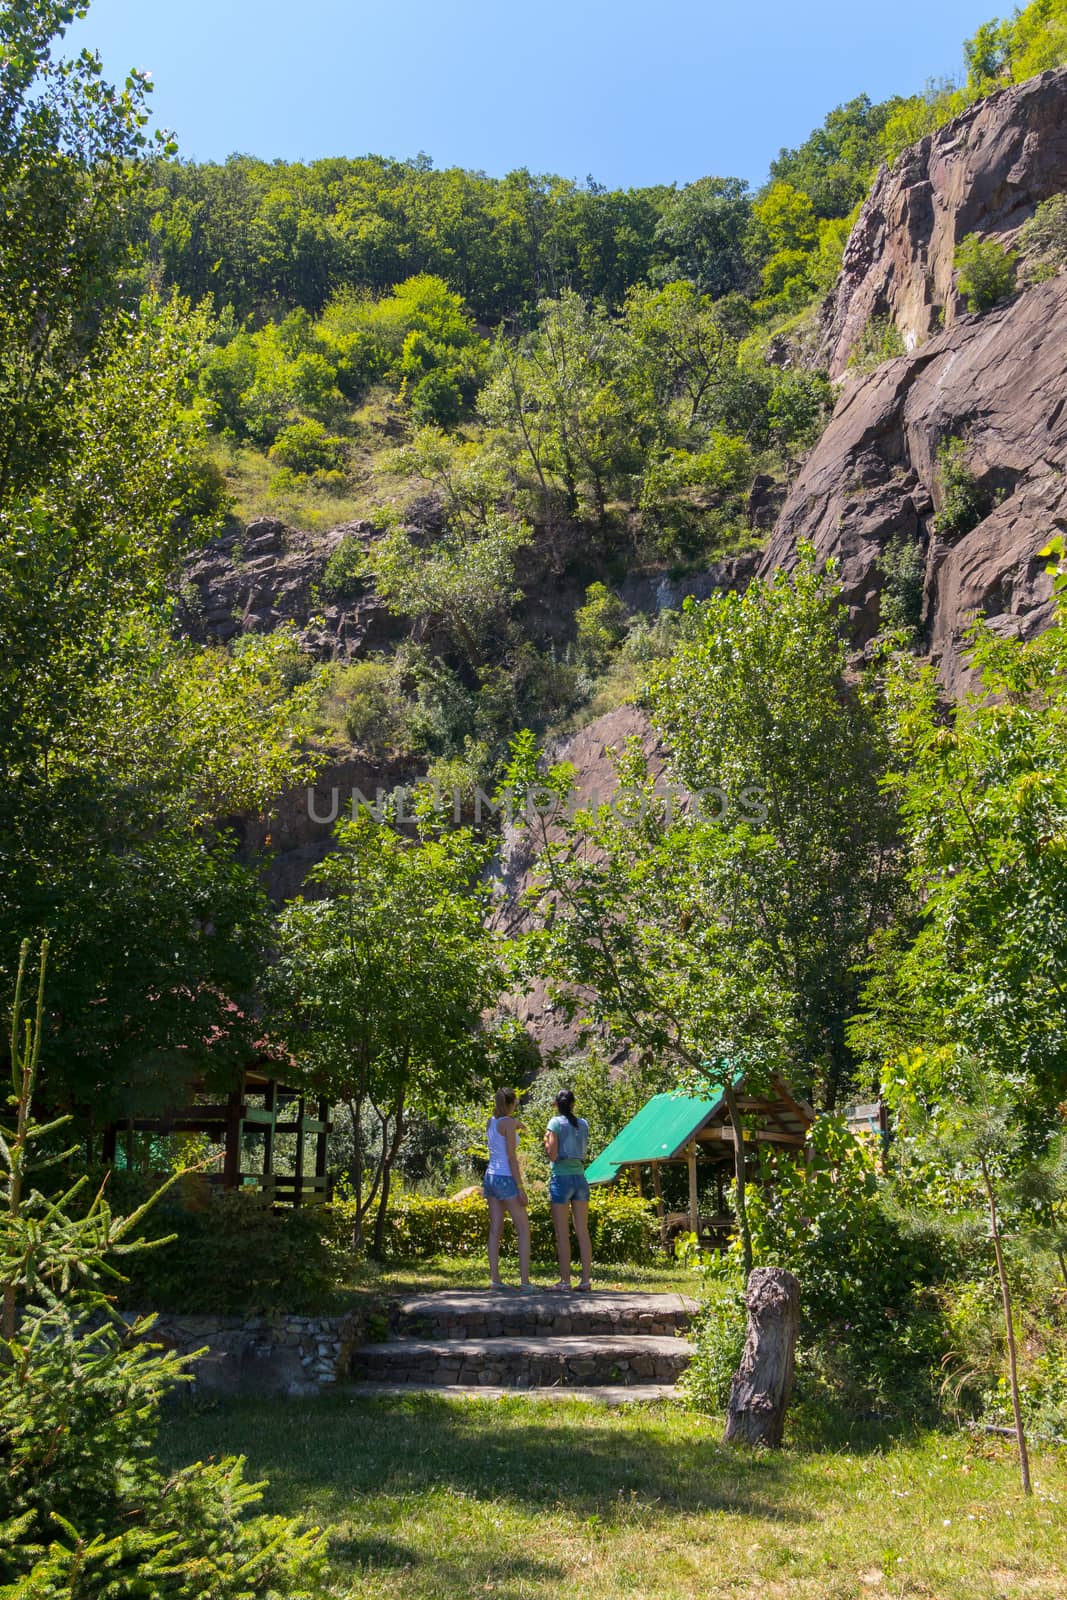 Girls climbing the stairs to the gazebos with green roofs against the backdrop of a large rocky mountain